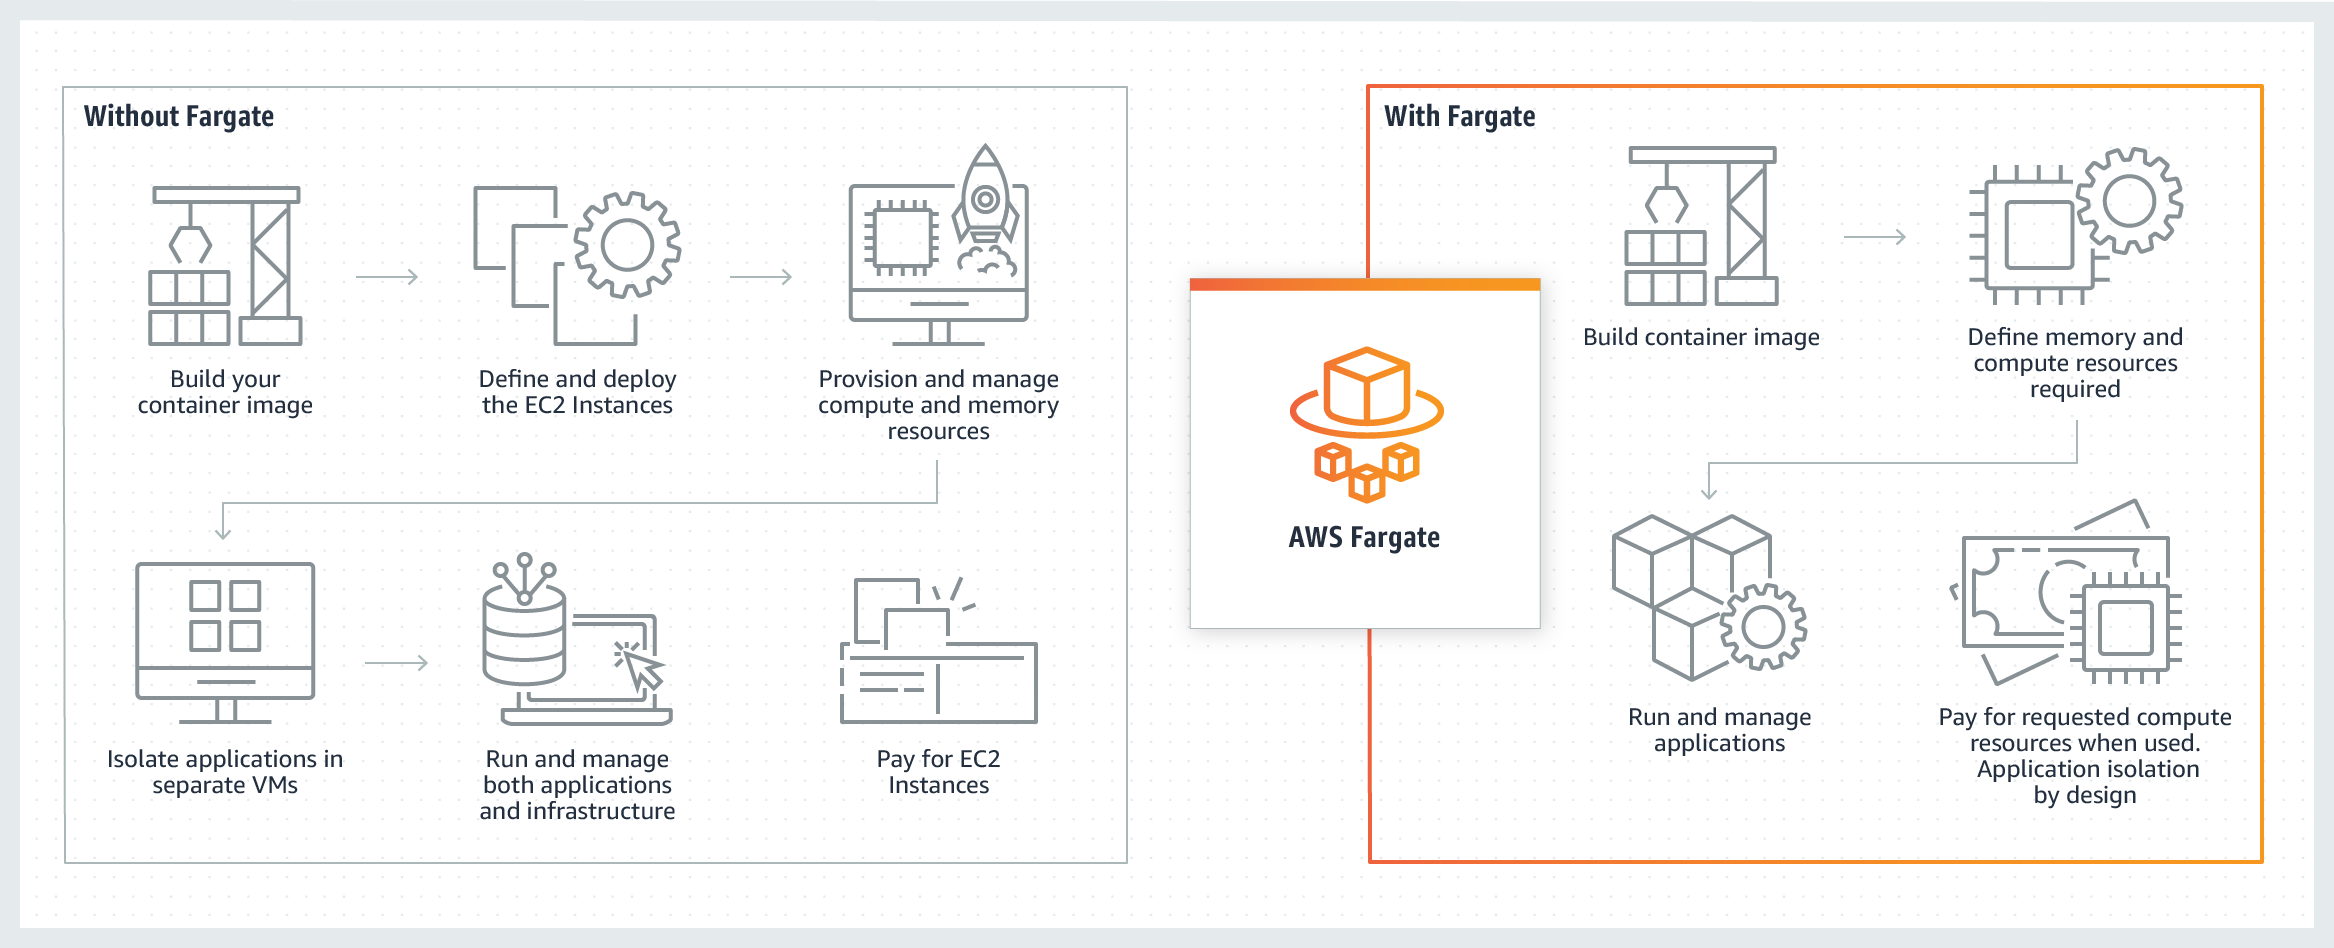 AWS Fargate process diagram, showing how serverless functions in the AWS cloud. featured Image